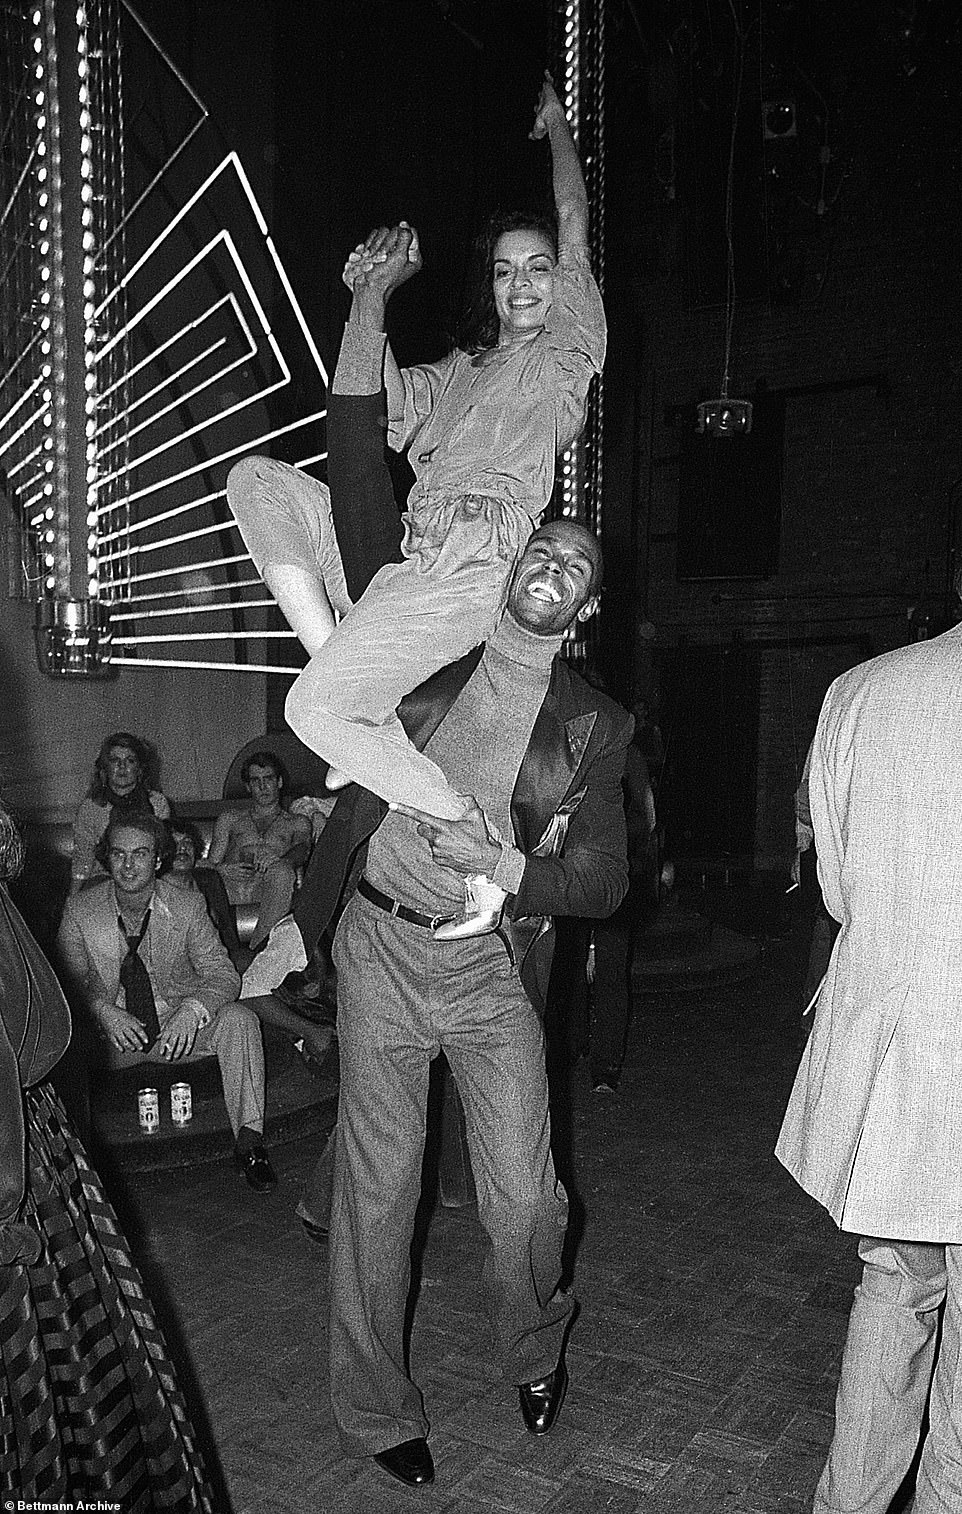 The model's charming persona, chiseled cheekbones, and dexterity charmed the likes of many including Jagger, seen here taking advantage of the 6'2'' Adonis's strength for a triumphant pose toward the end of dance number